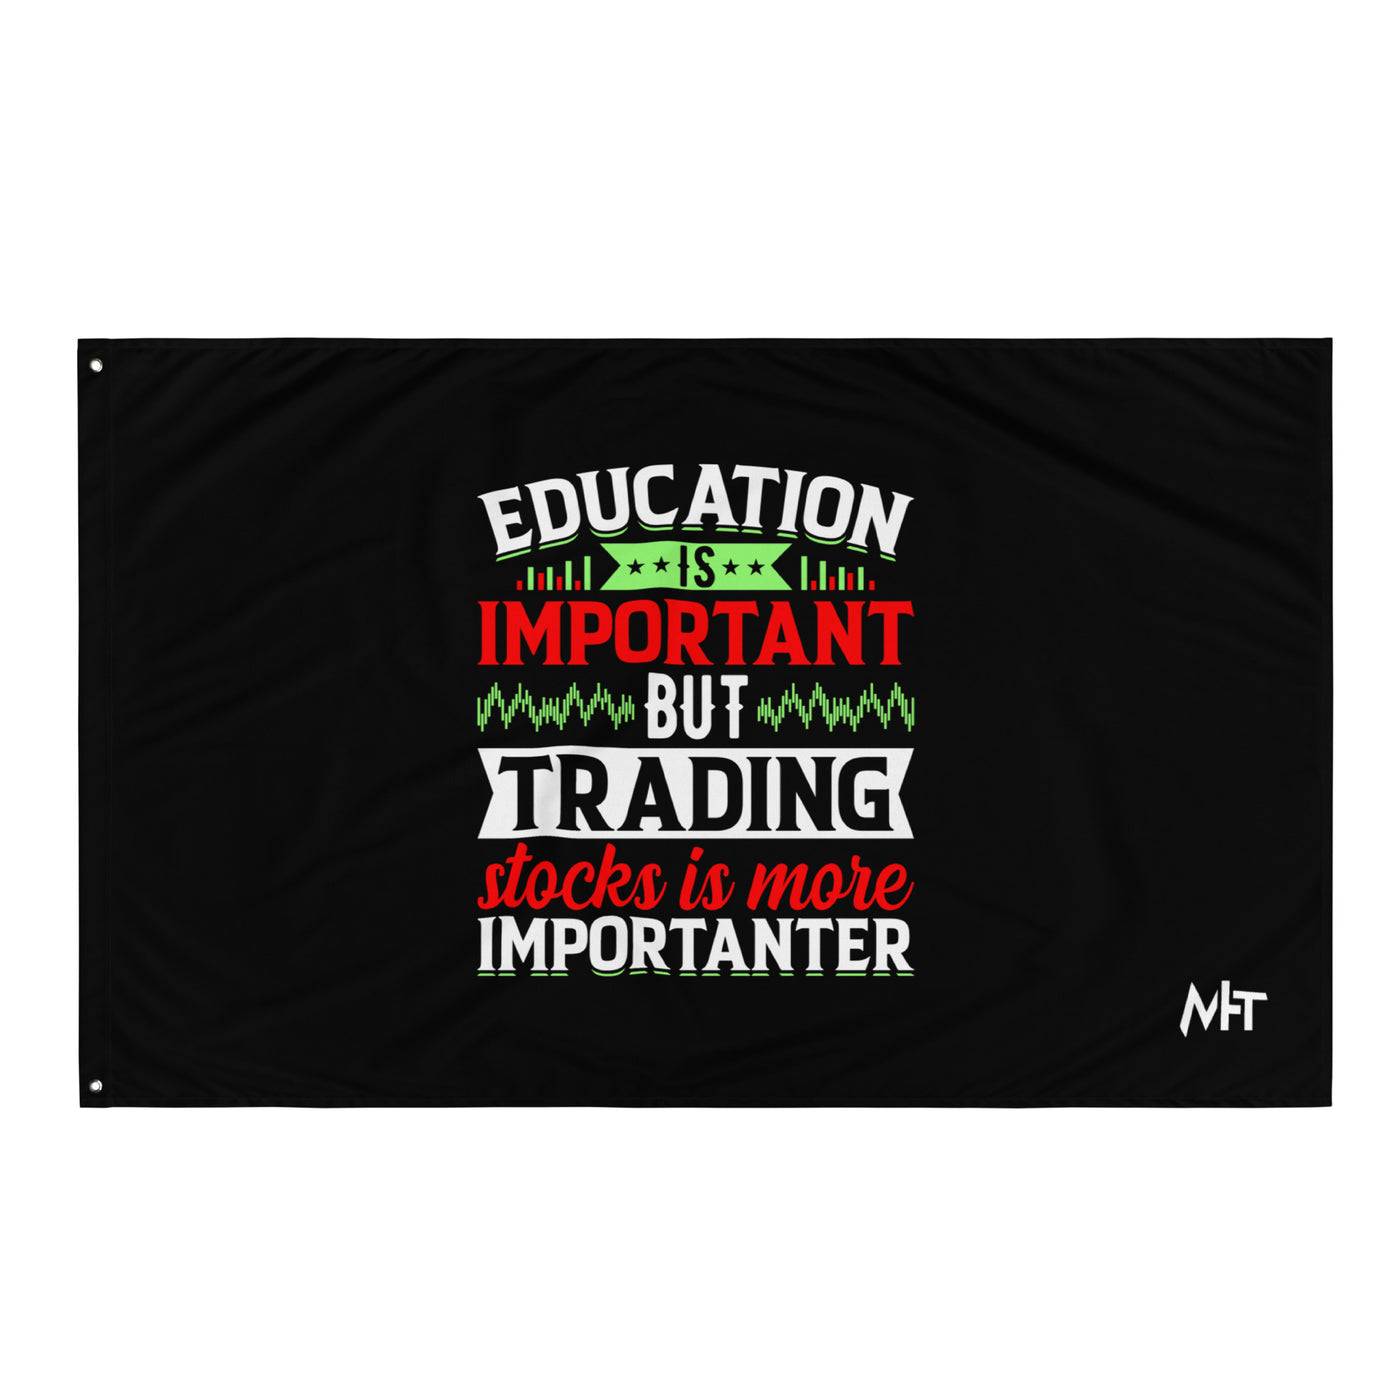 Education is important but trading stocks is more importanter - Flag